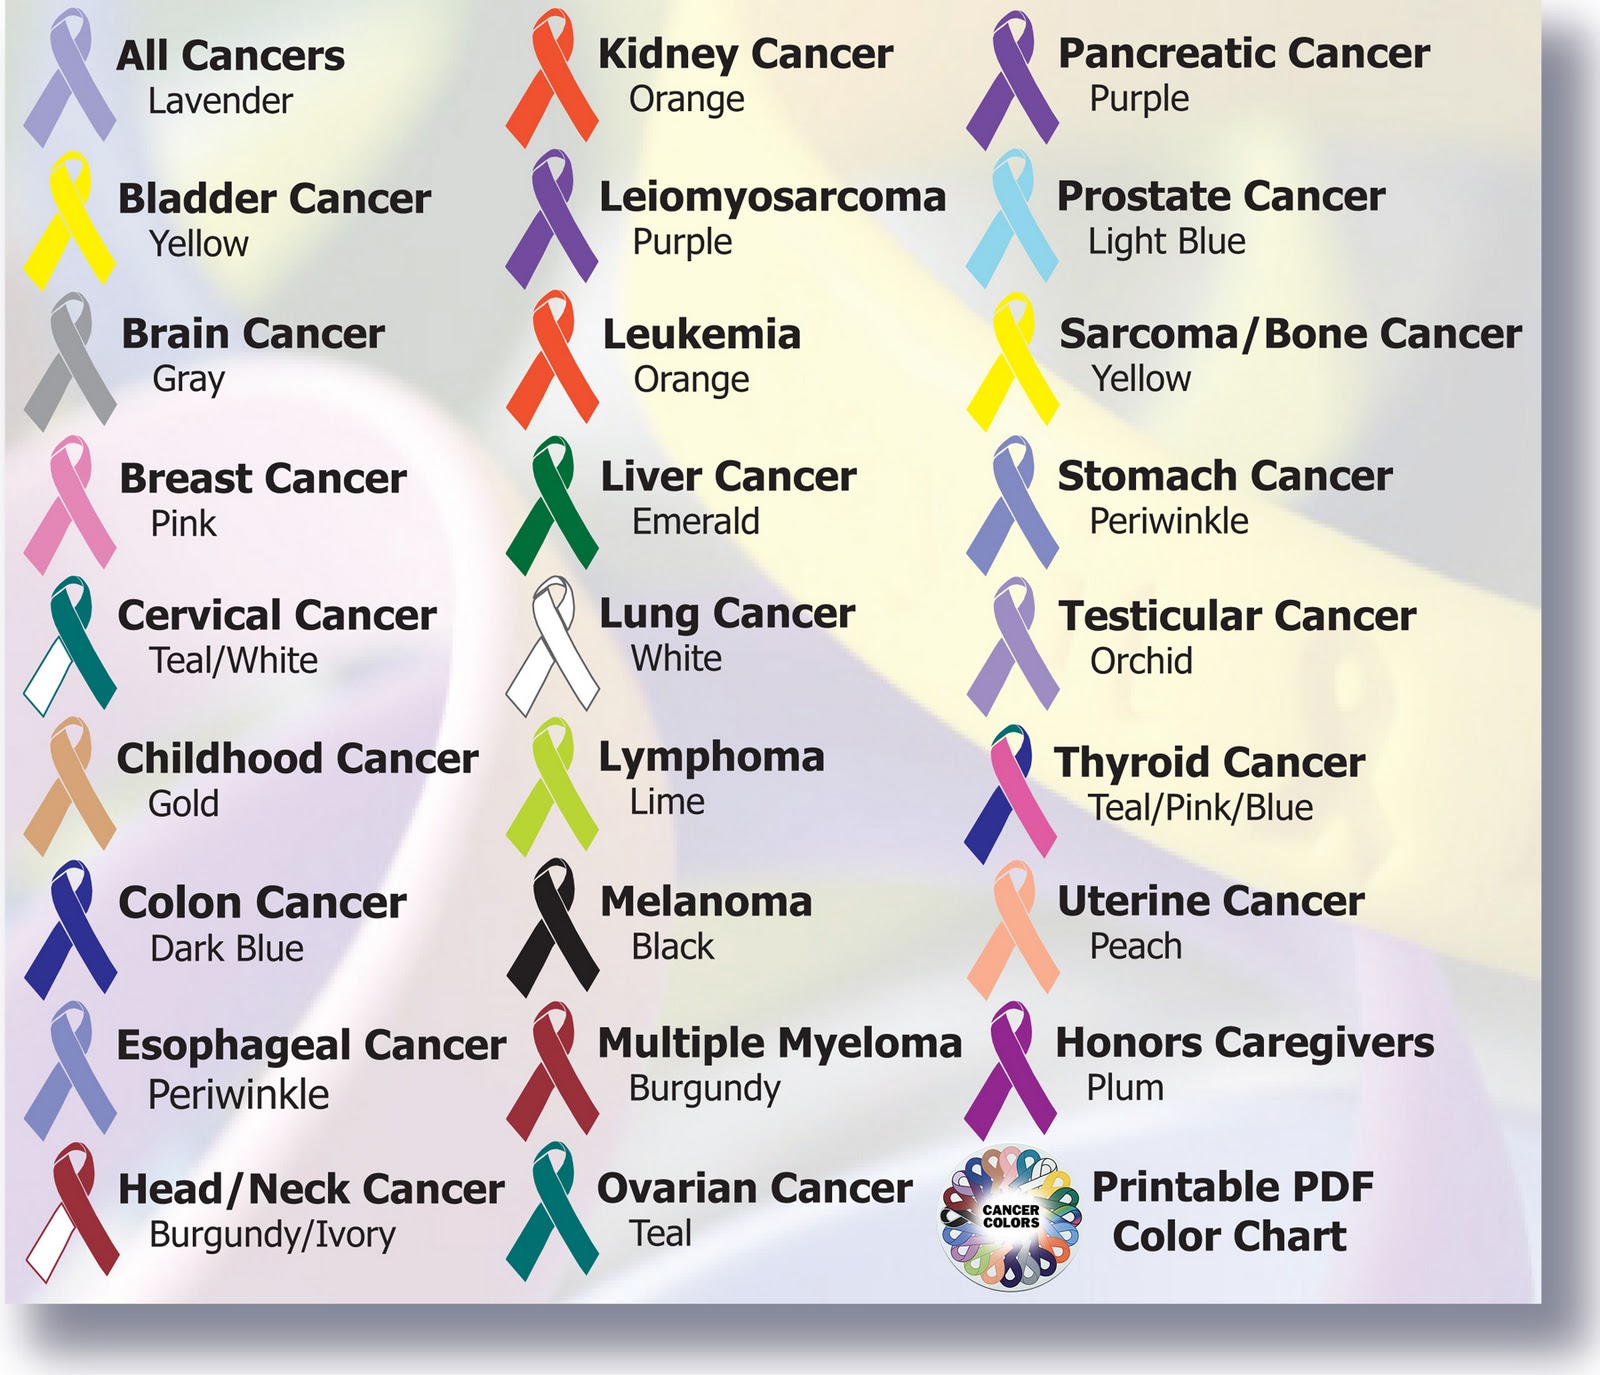 What is a Cancer's favorite color?